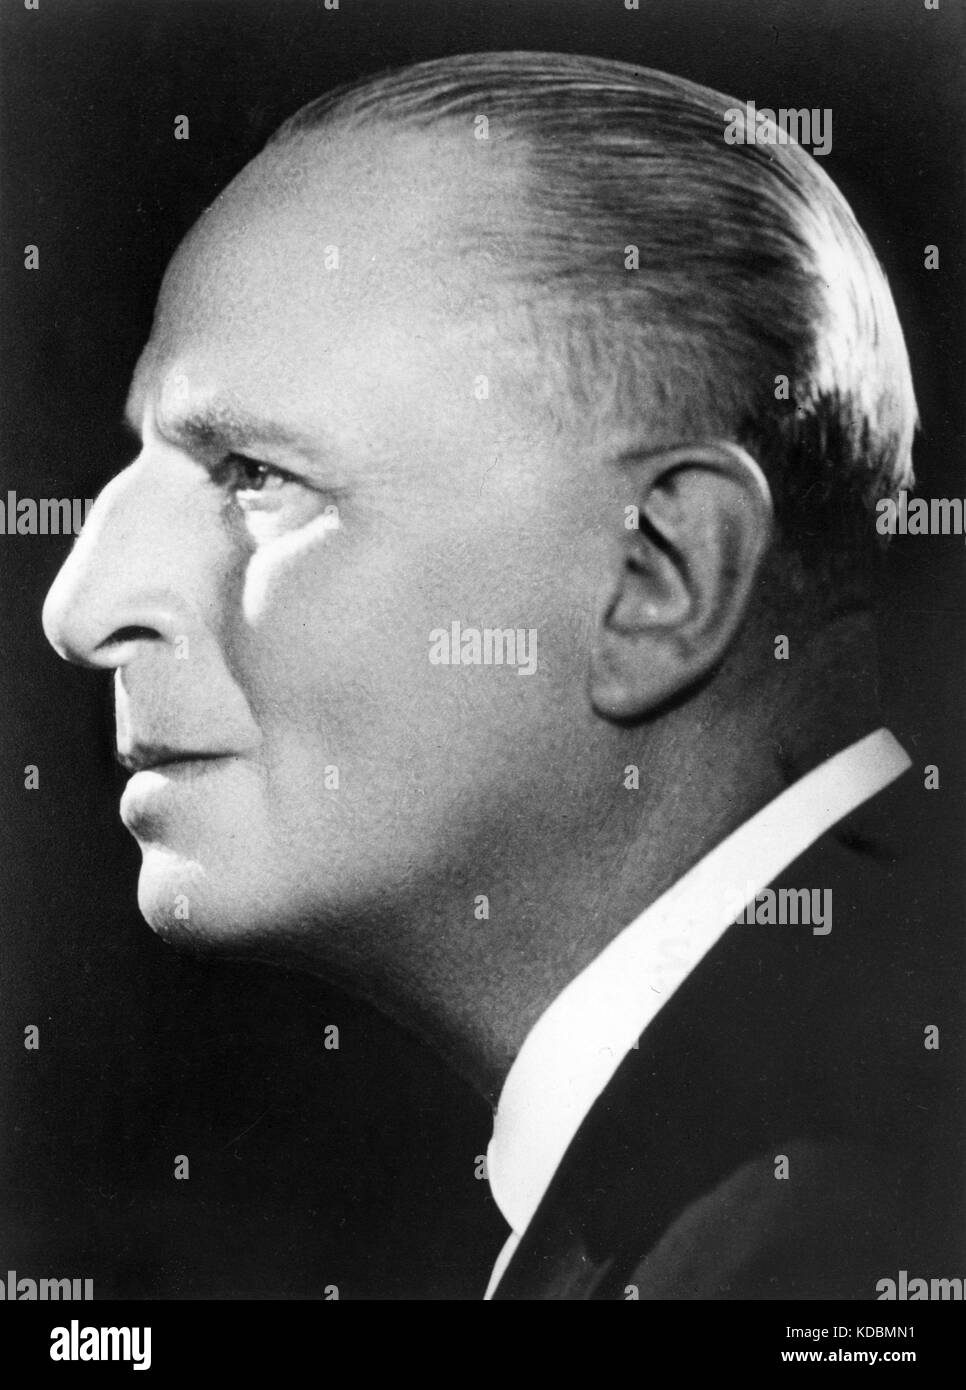 Photo Must Be Credited ©Alpha Press 050000 09/03/1966 Sir Oswald Mosley, leader of the Unionist Movement, has been adopted as the prospective Parliamentary Candidate for Shoreditch and Finsbury. Stock Photo